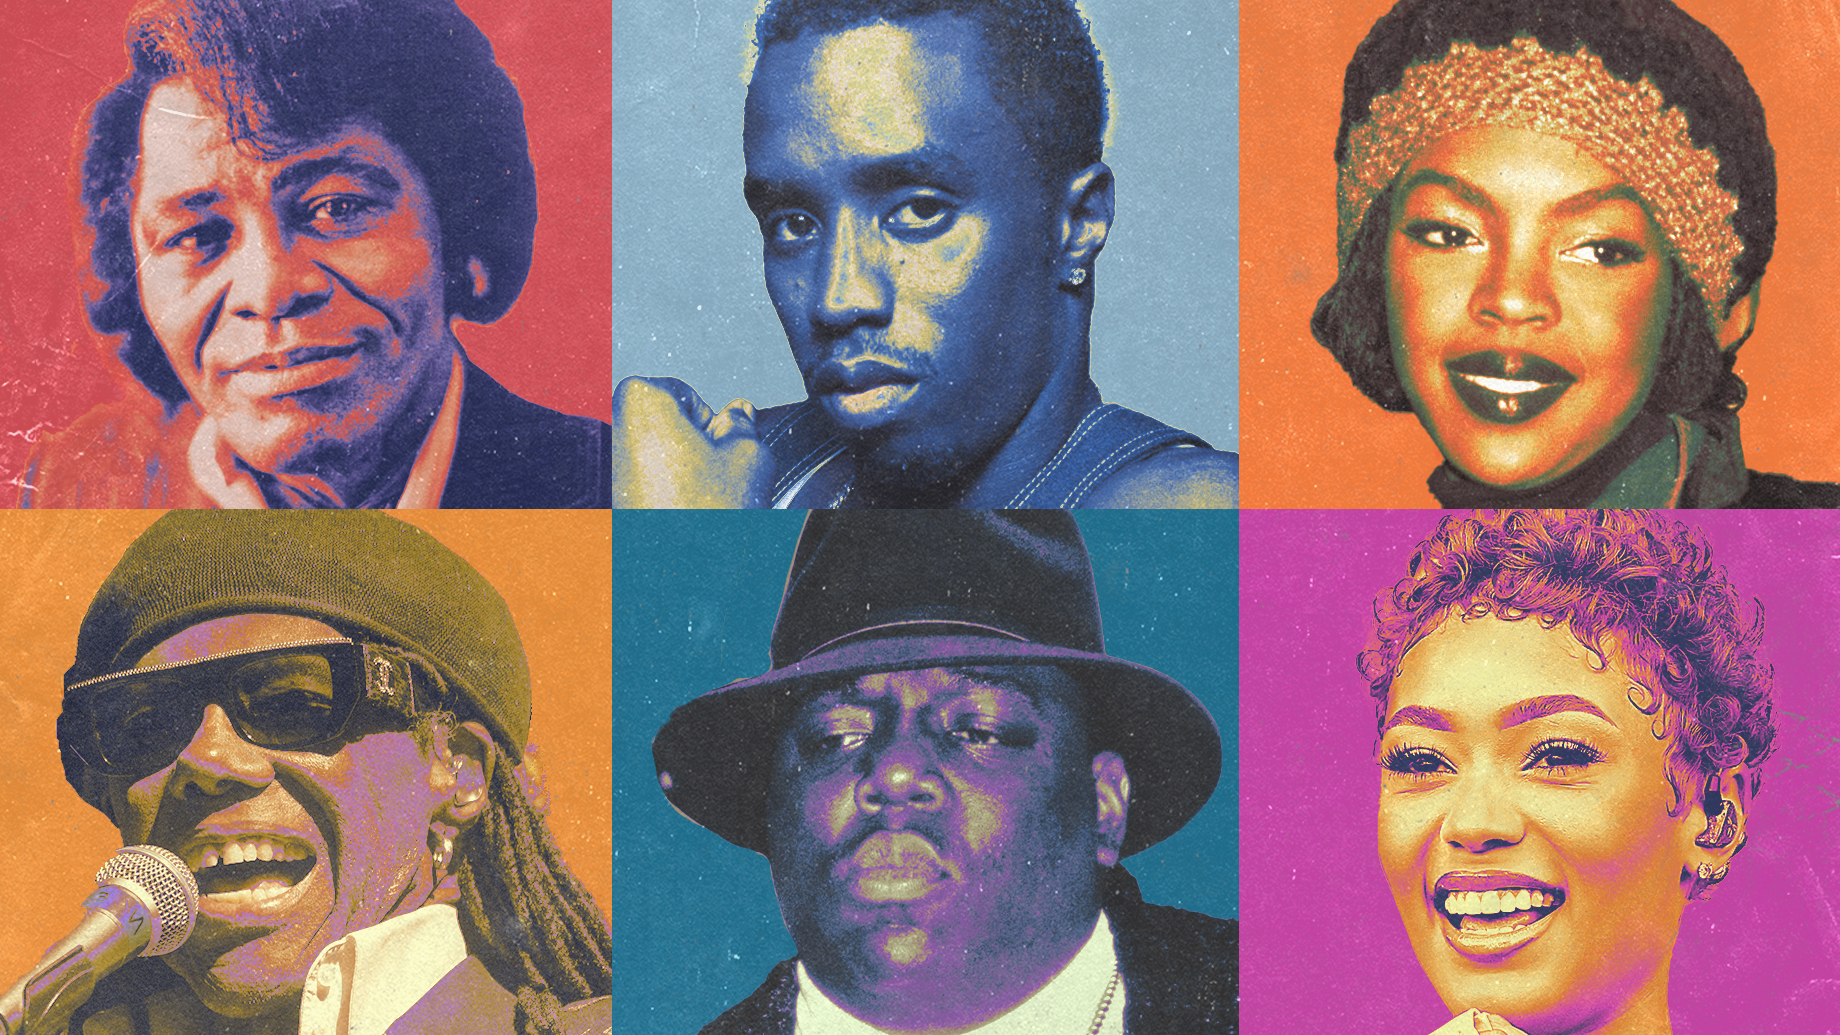 Enjoy these rare photos of Jay-Z, Notorious B.I.G., Puffy, and A Tribe  Called Quest